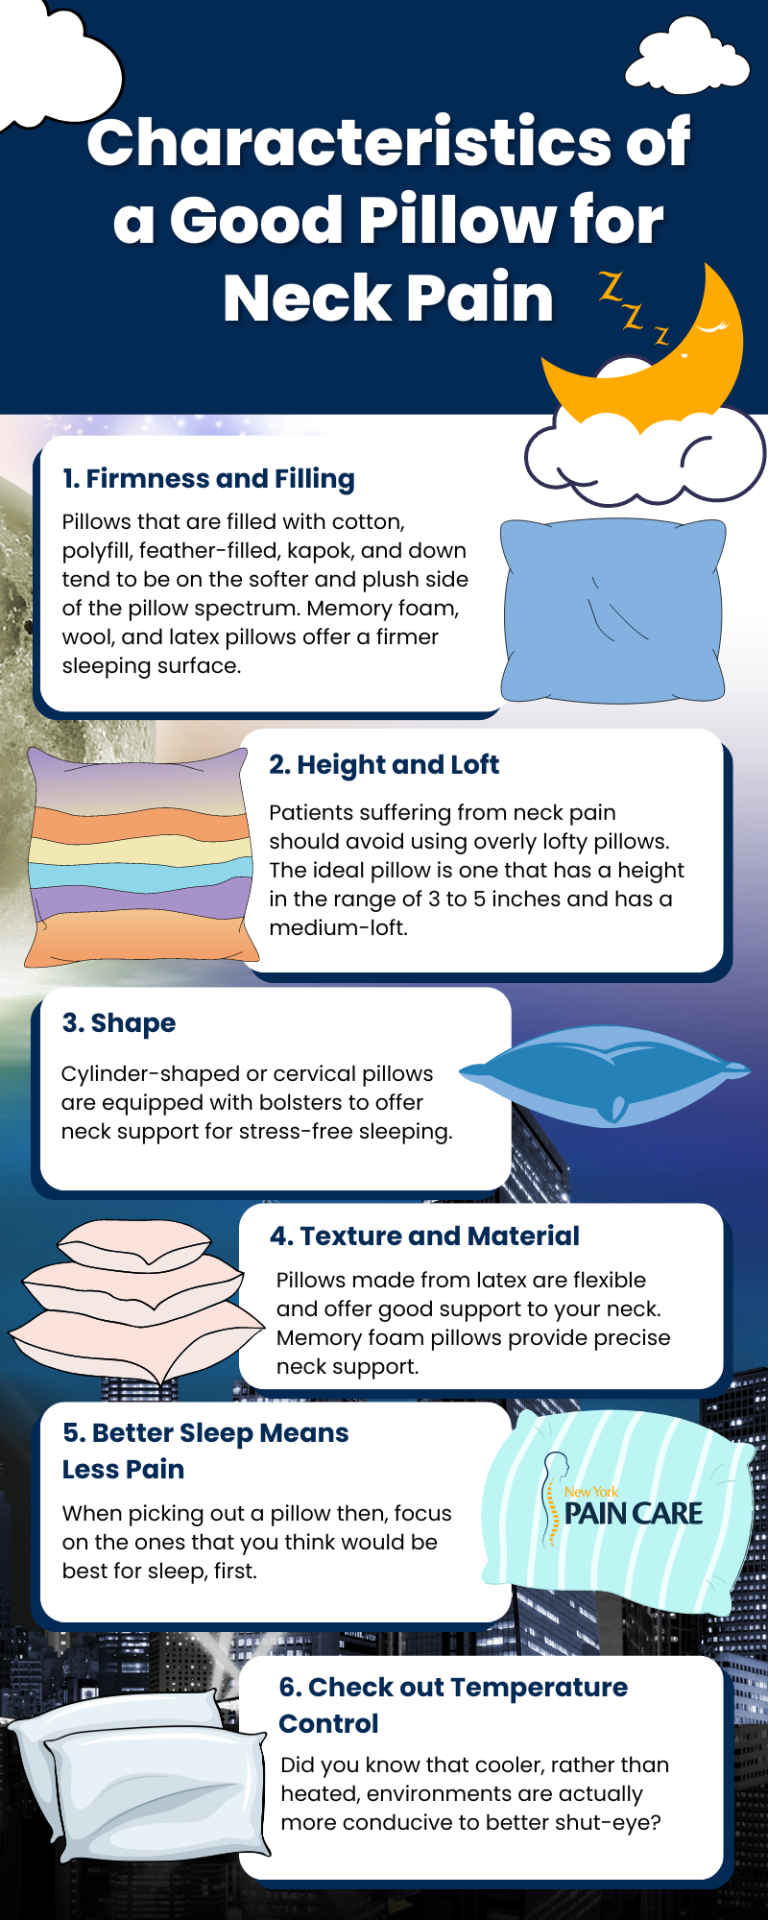 Good Pillow for Neck Pain 768x1920